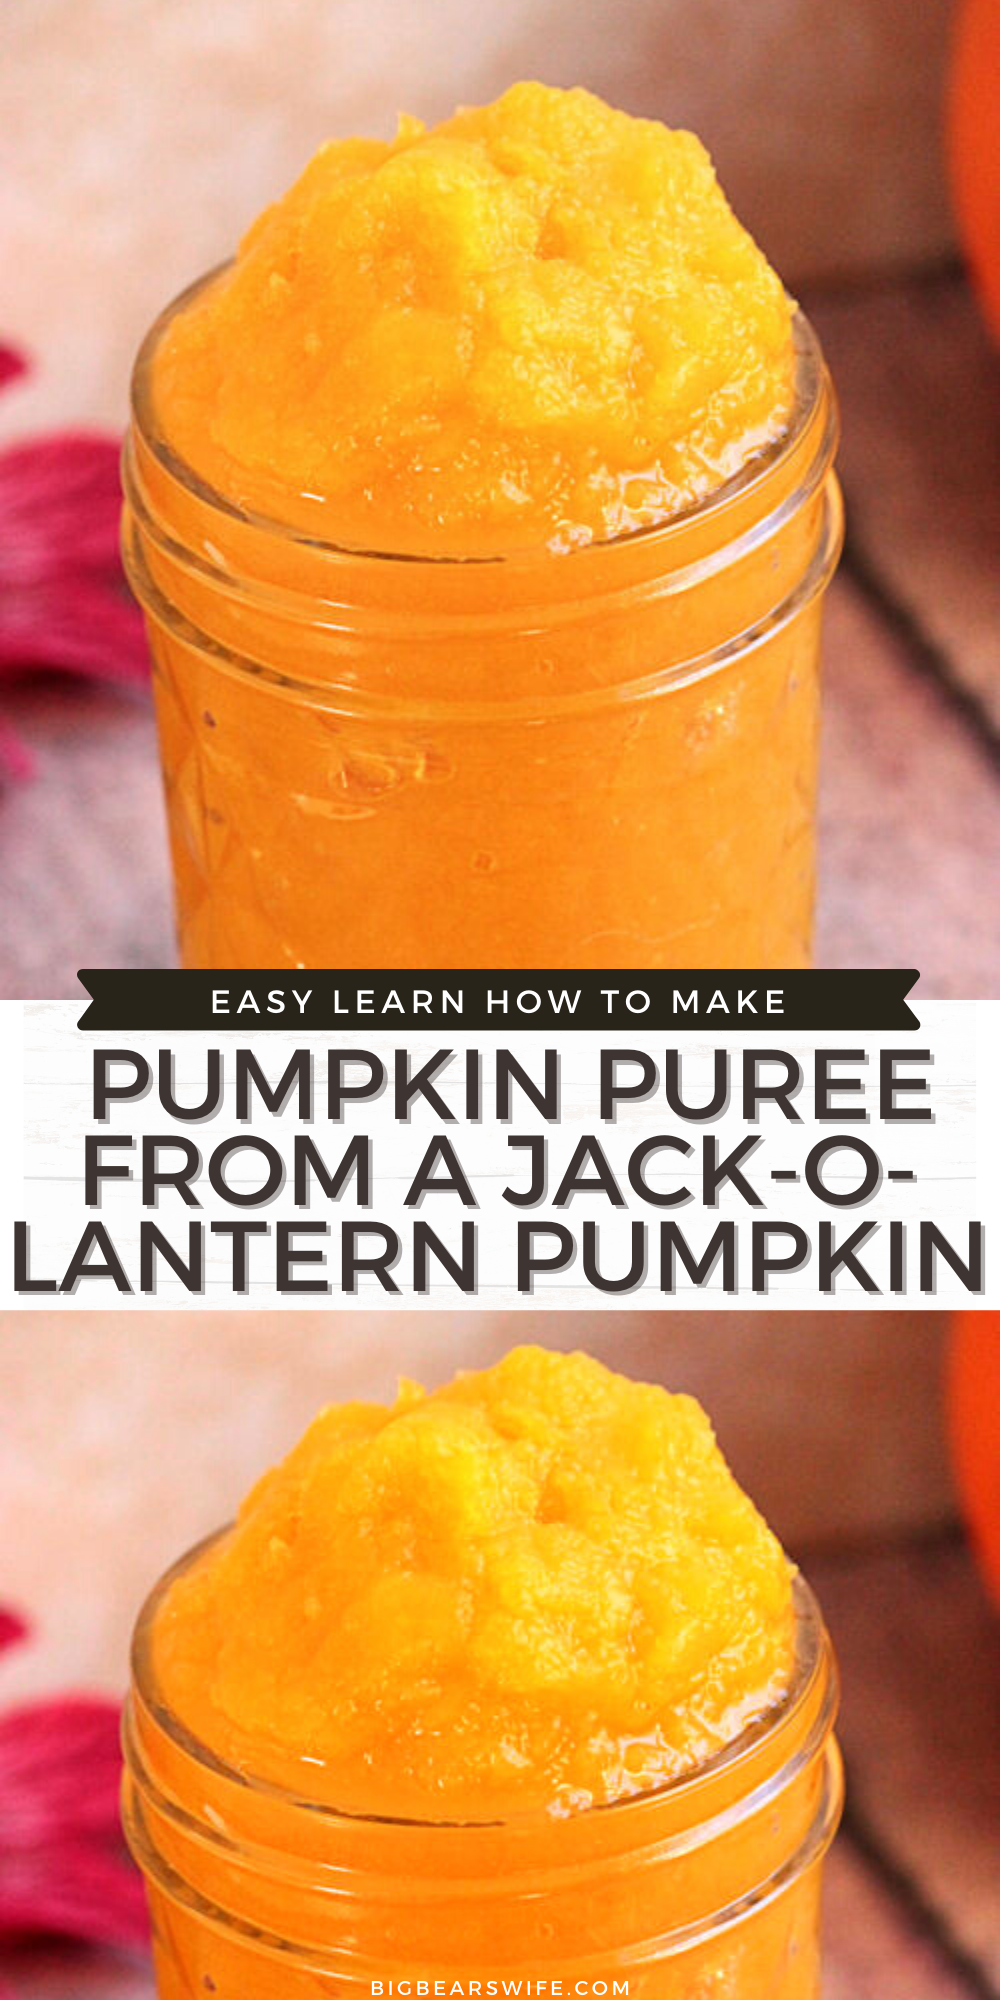 Want to make some homemade Pumpkin Desserts? Turn those un-carved pumpkins into homemade pumpkin puree! Perfect for Pumpkin Pies, Pumpkin Bread, Pumpkin Cookies and more!  This post will teach you how to make Homemade Pumpkin Puree from Jack-O-Lantern style pumpkins.  via @bigbearswife